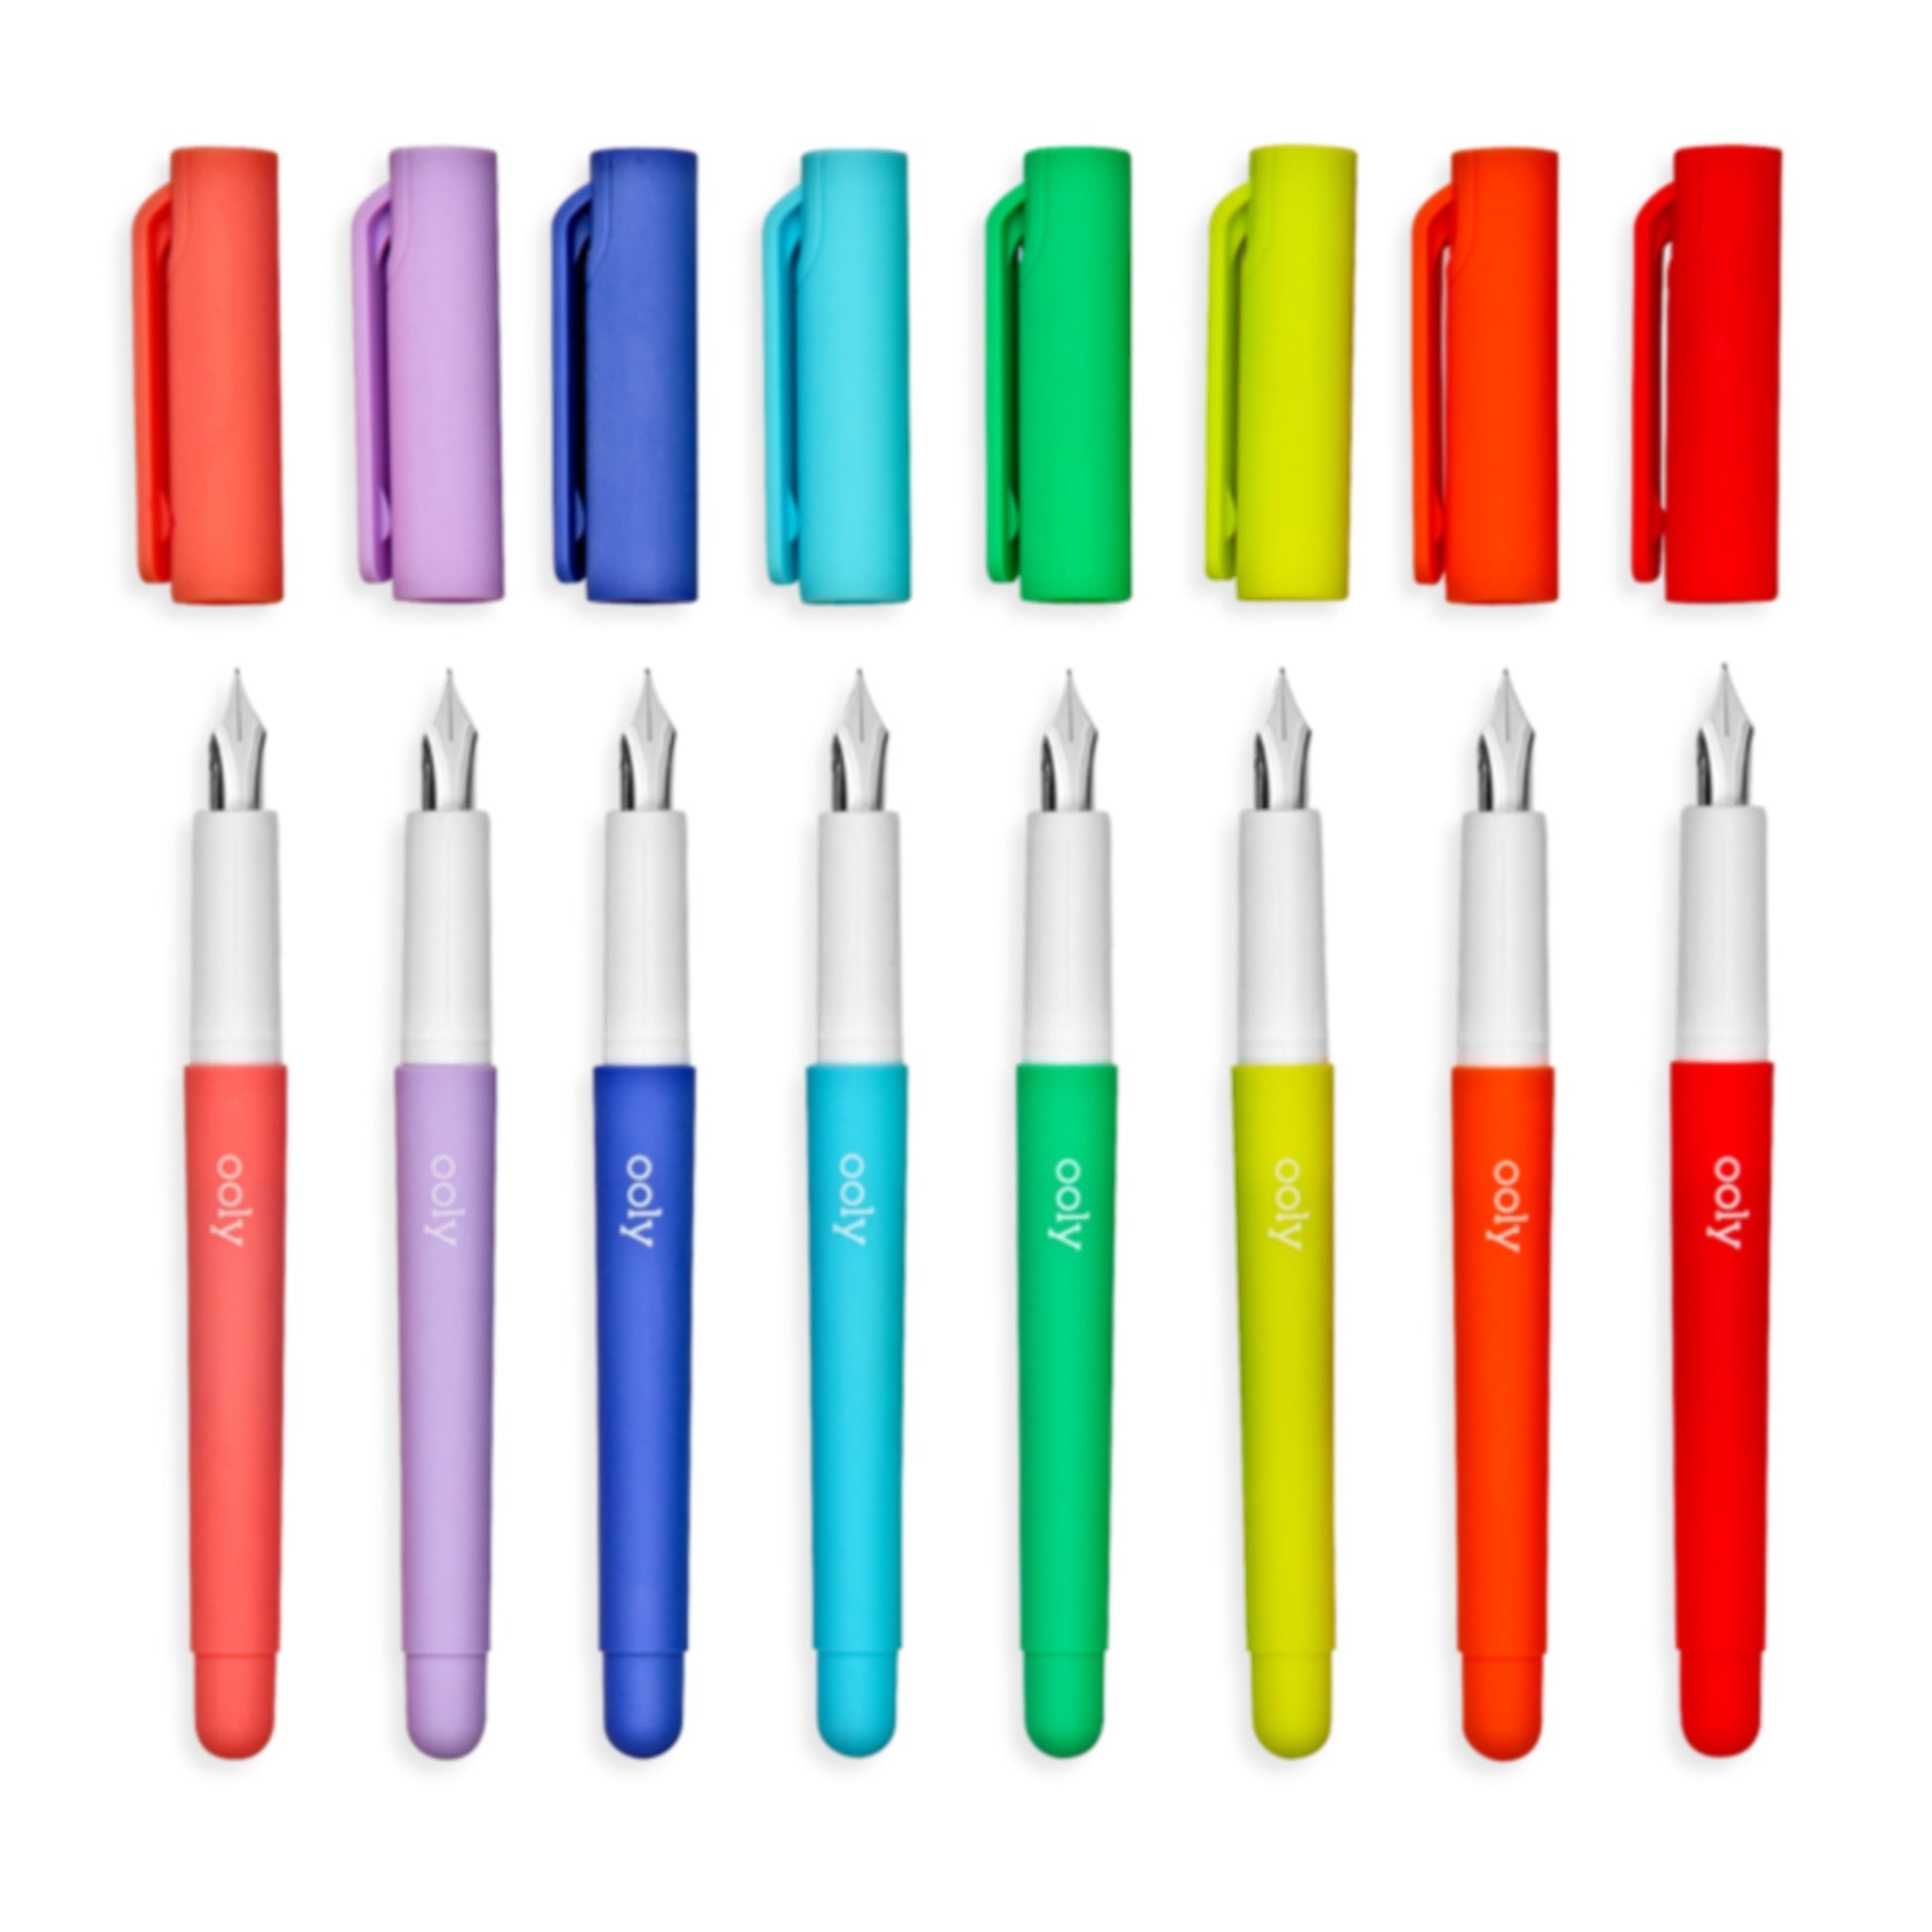 What Color Is Your Pen?